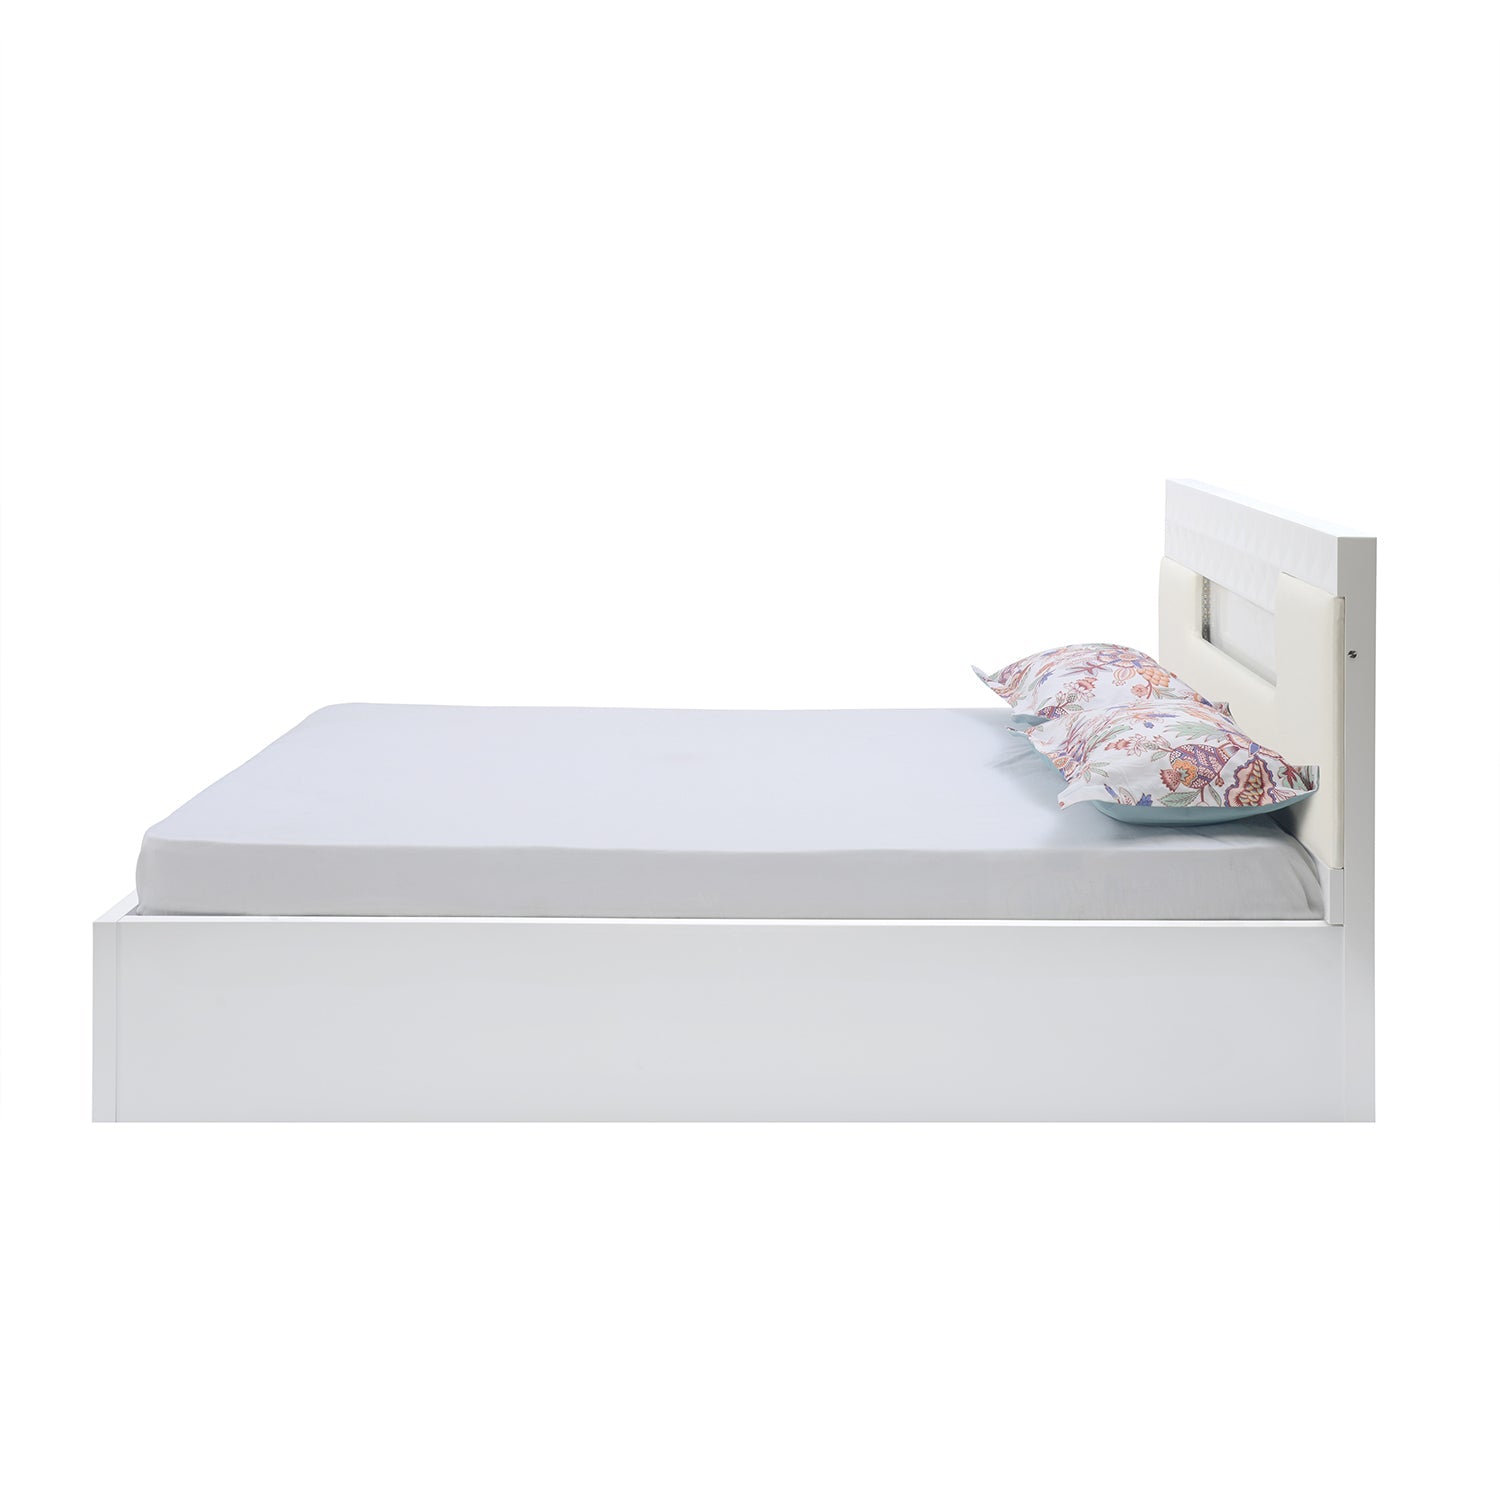 Theia High Gloss Queen Bed with Hydraulic Storage (White)